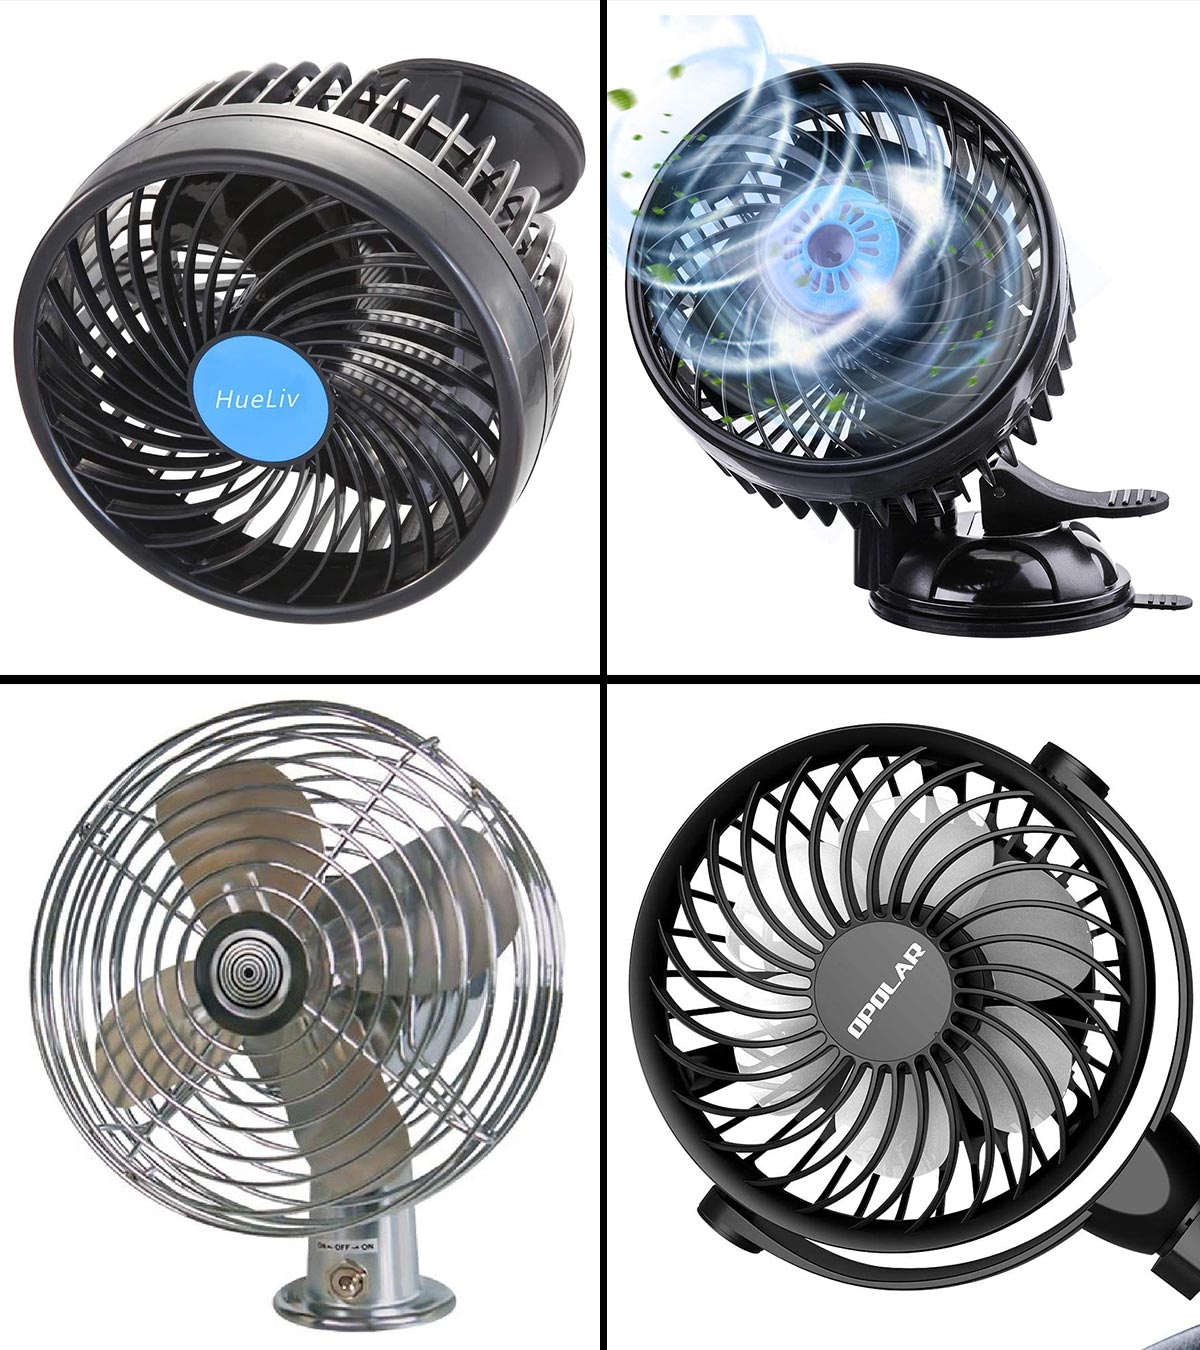 12 Volt Auto Fan with Suction Cup Extra cooling for cars